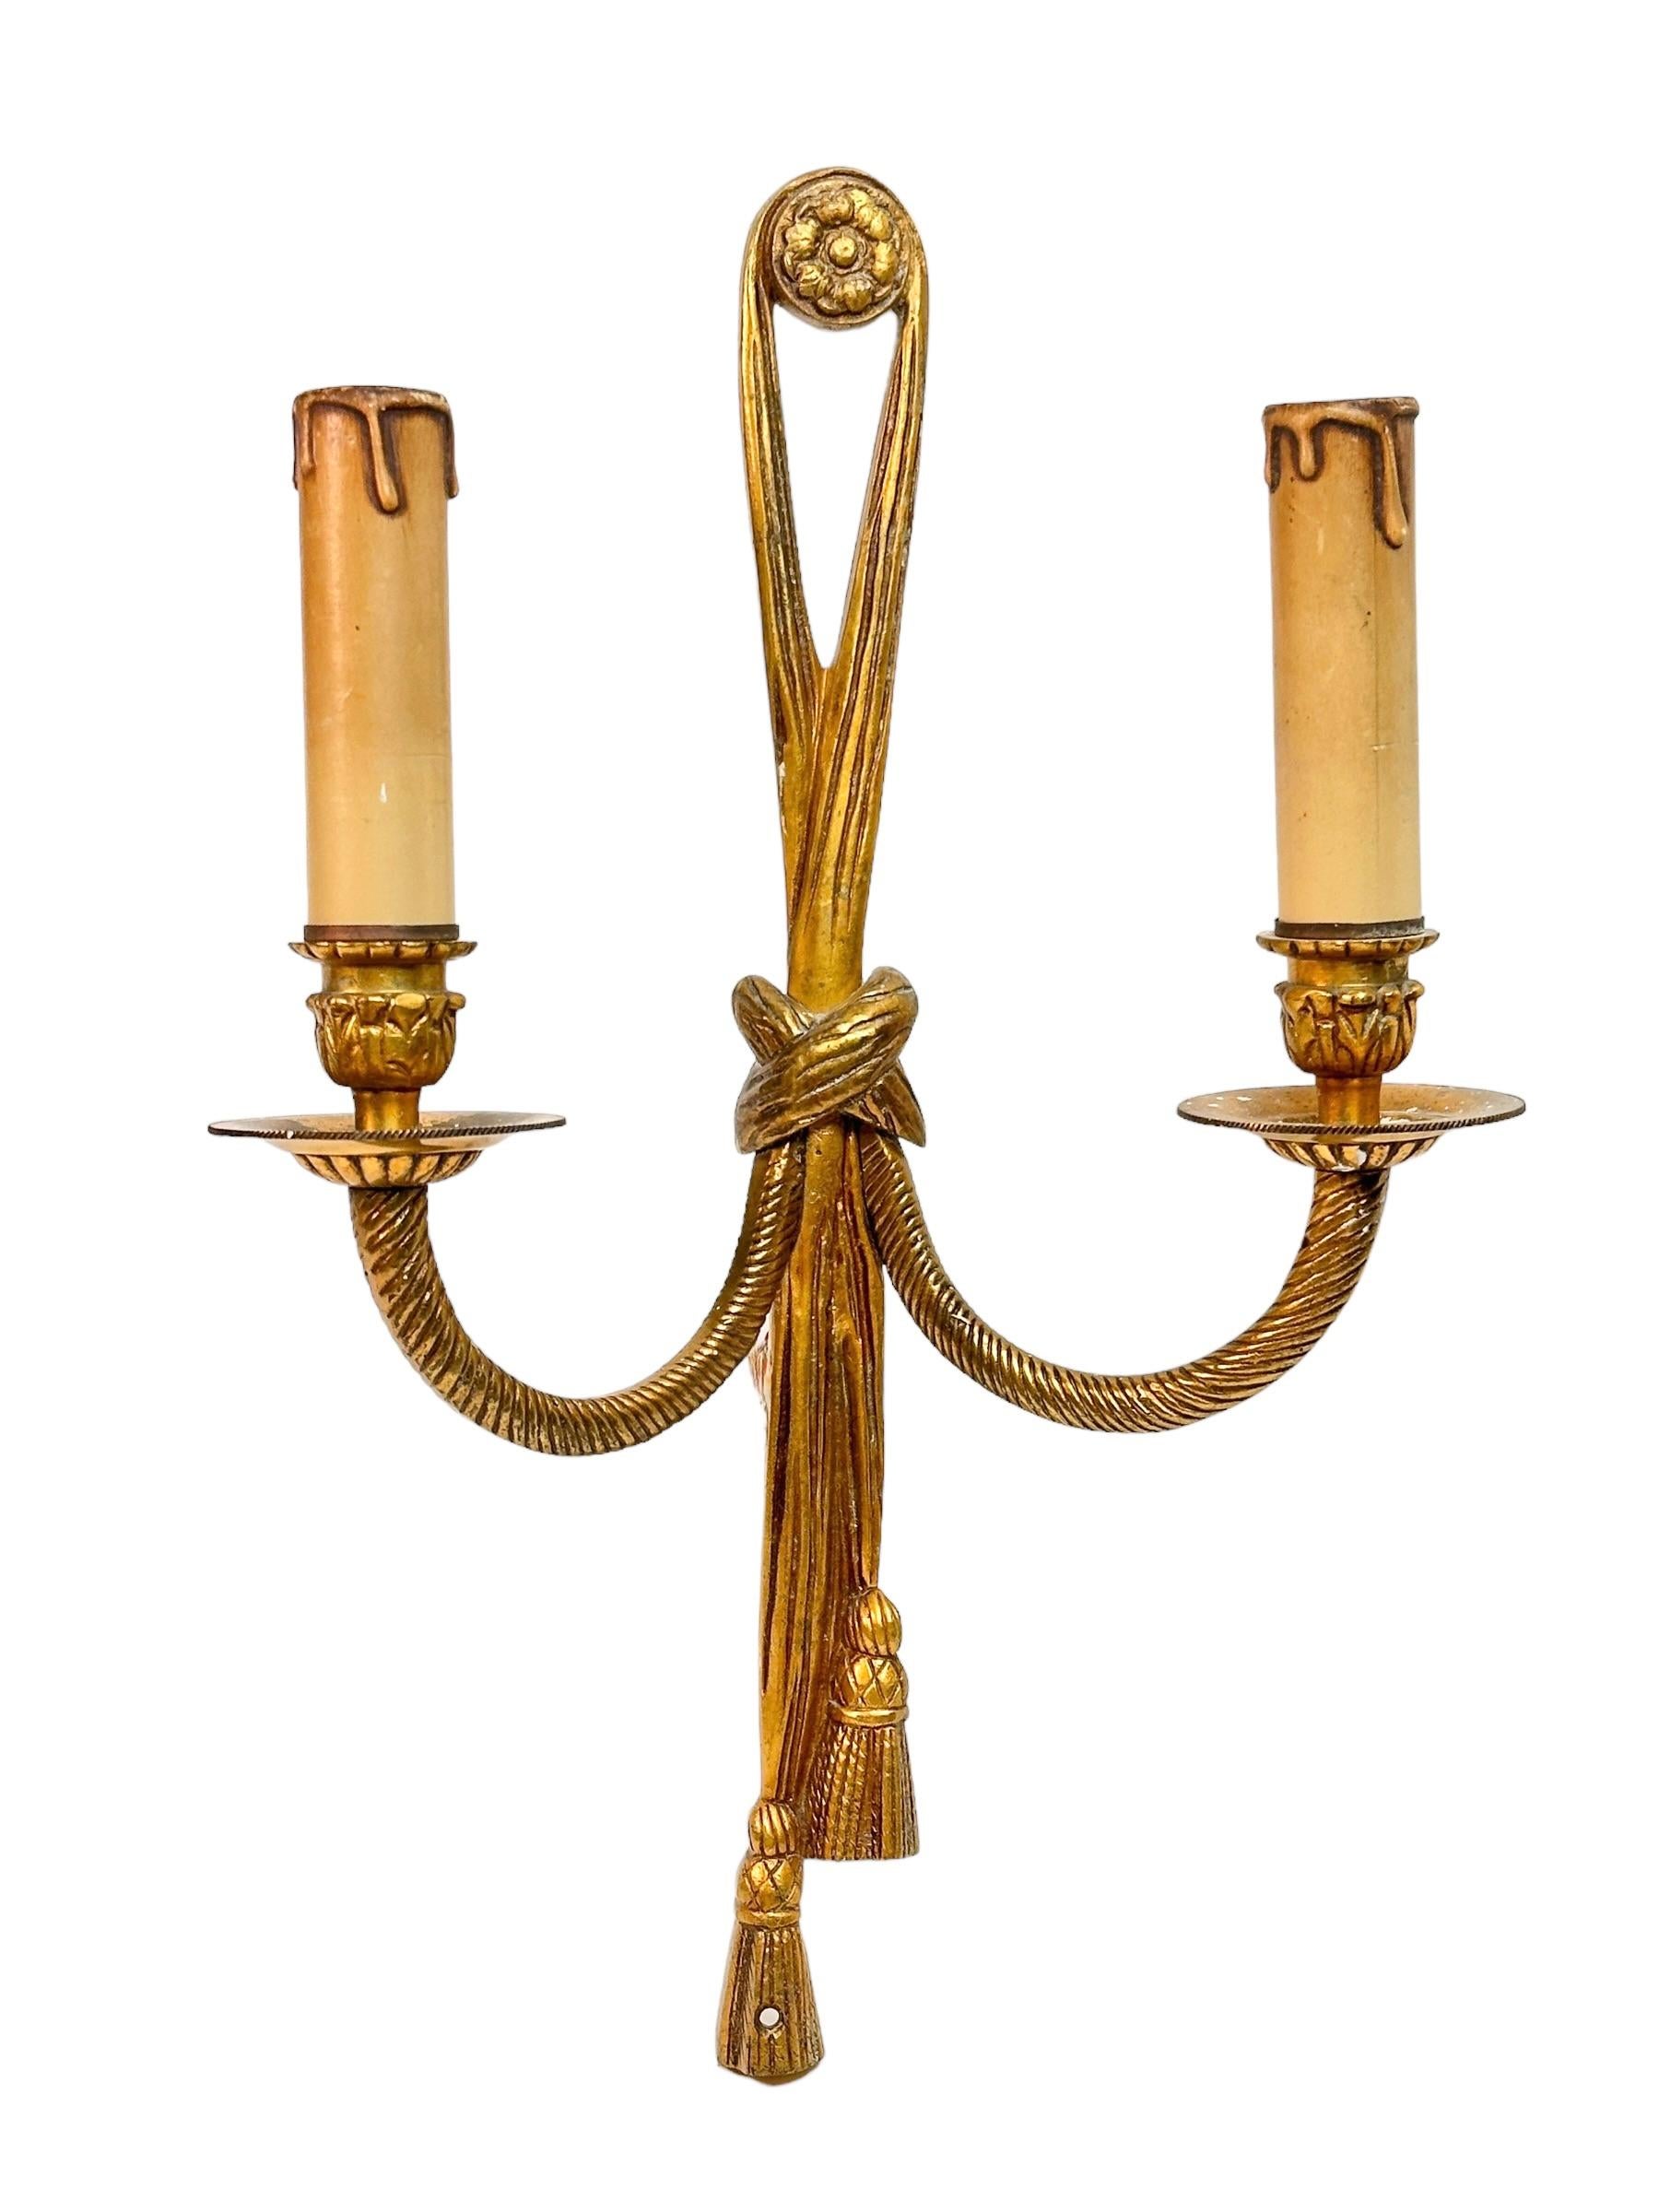 French Large Wall Light  Sconce Gold Bronze Louis XVI Style with Ribbons, France  For Sale